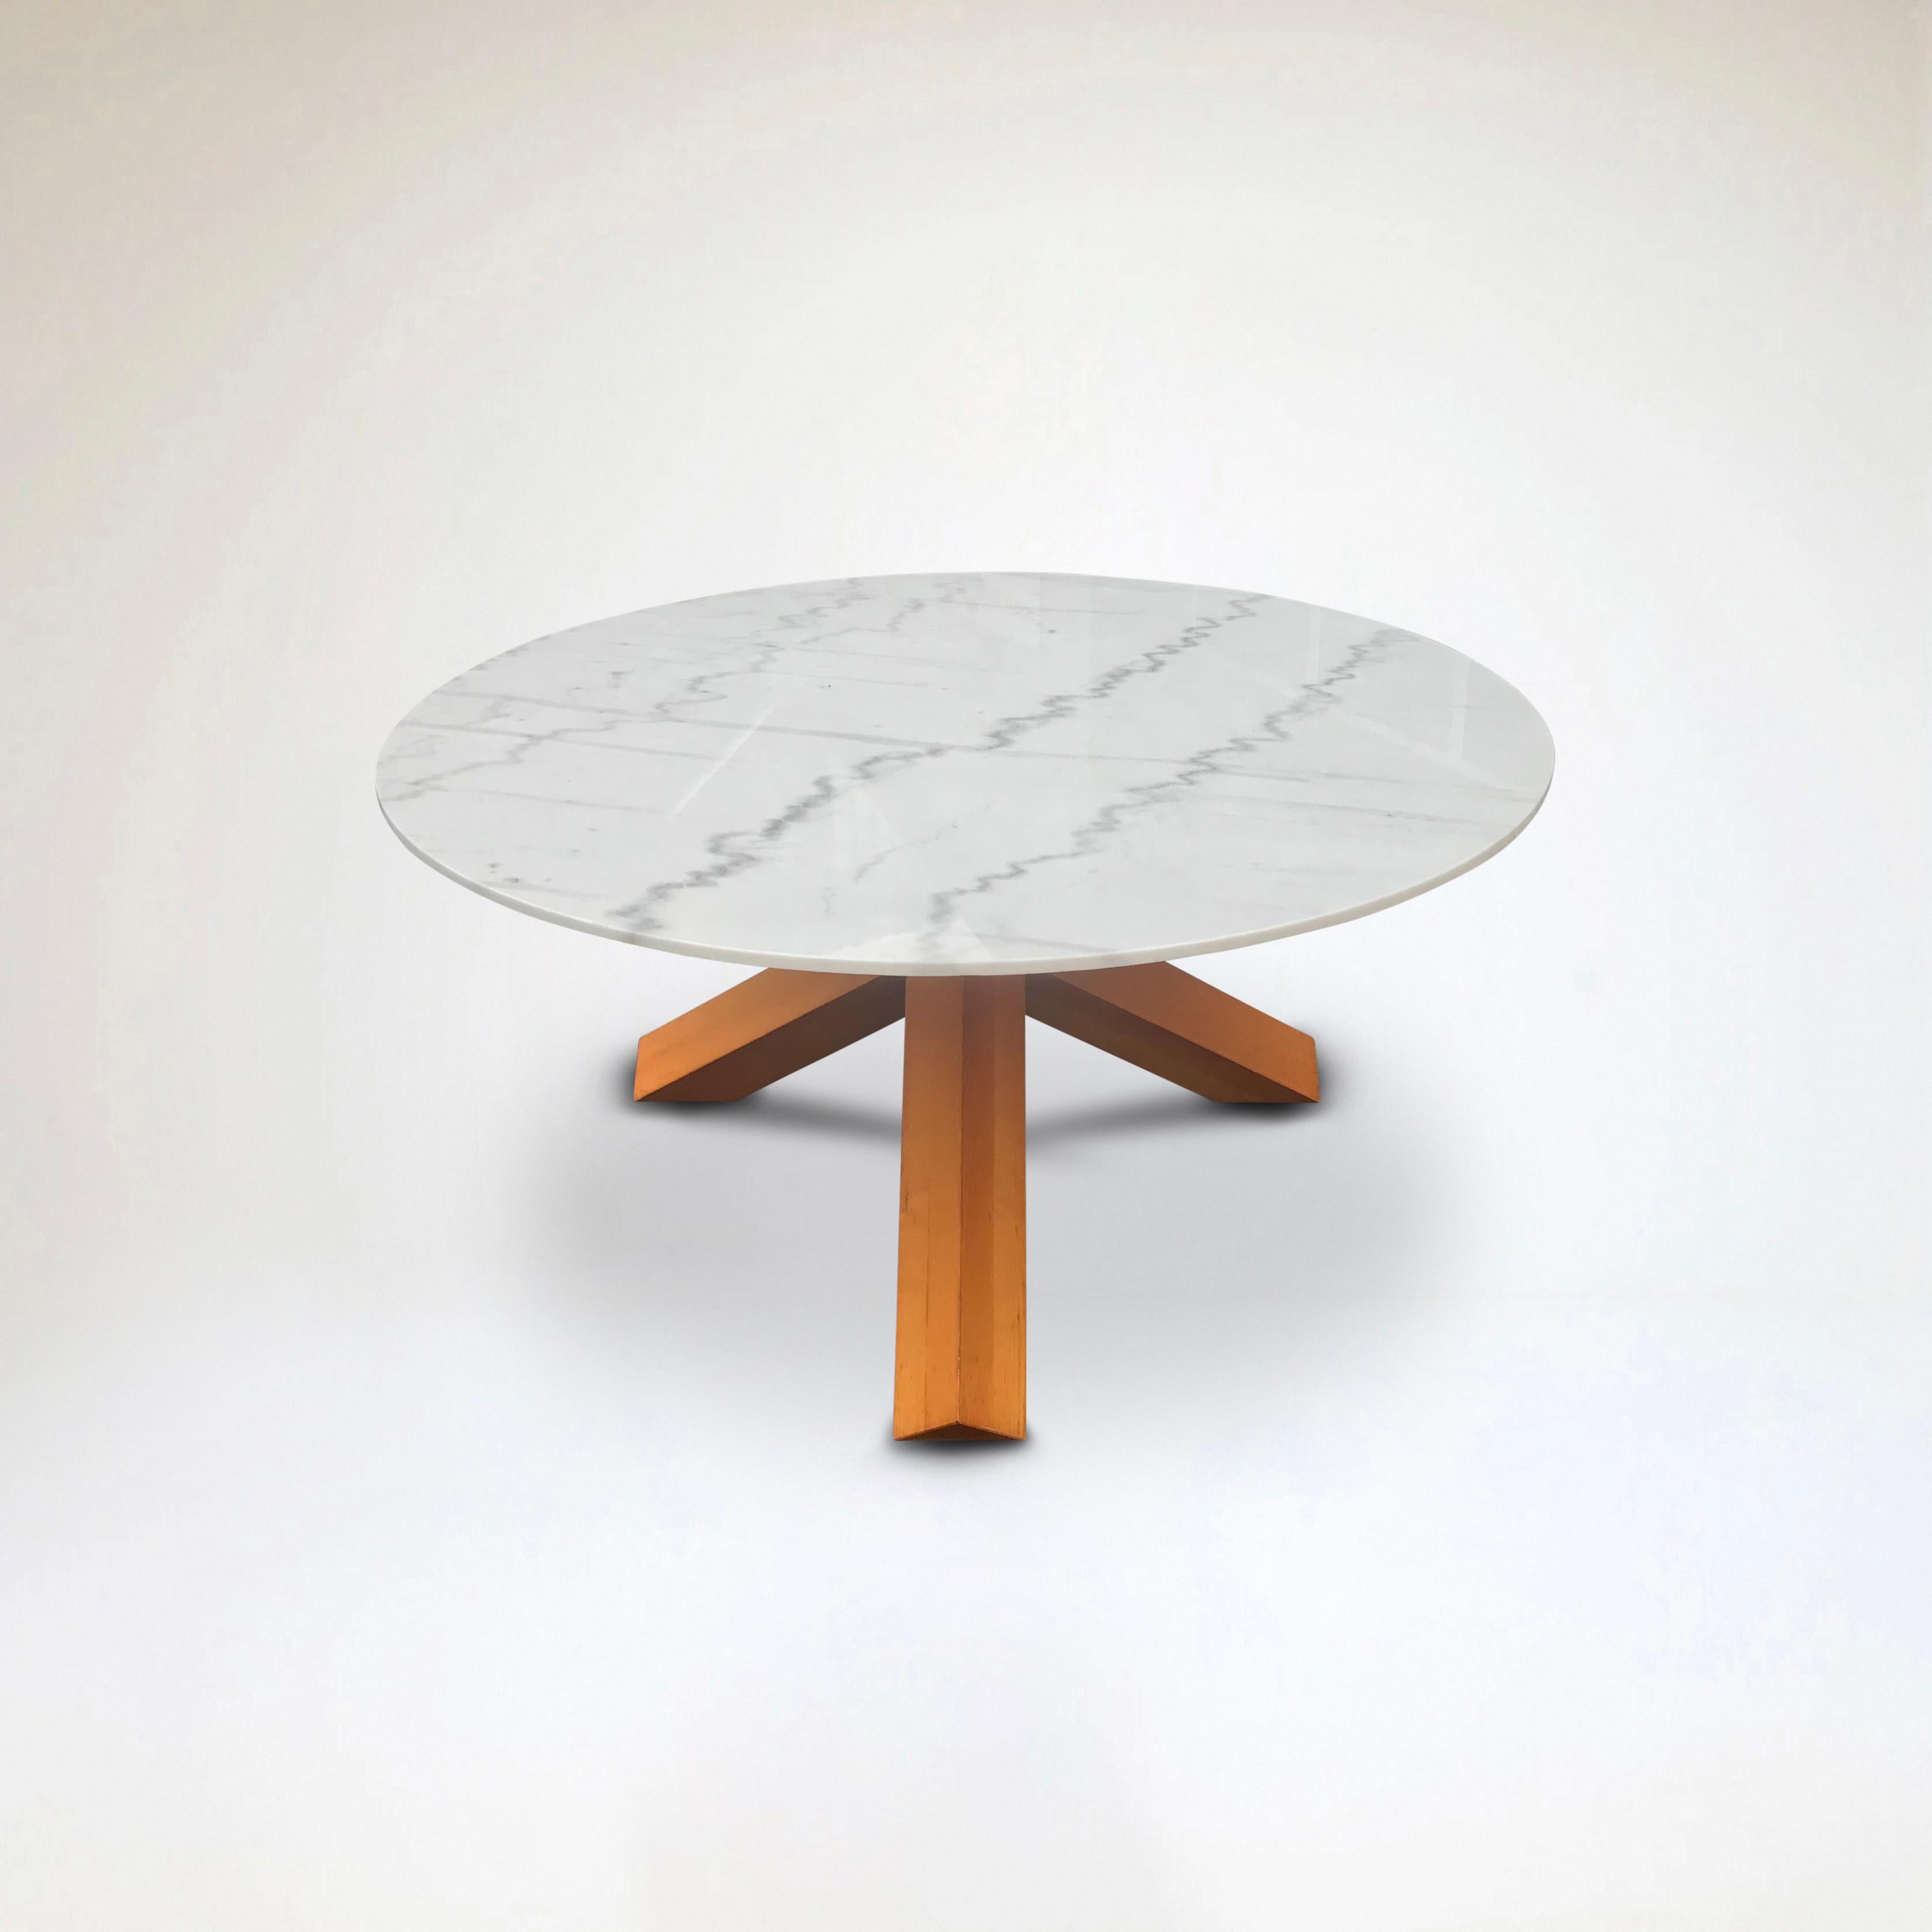 Late 20th Century La Rotonda Ash and marble dining table by Mario Bellini for Cassina 1980s For Sale